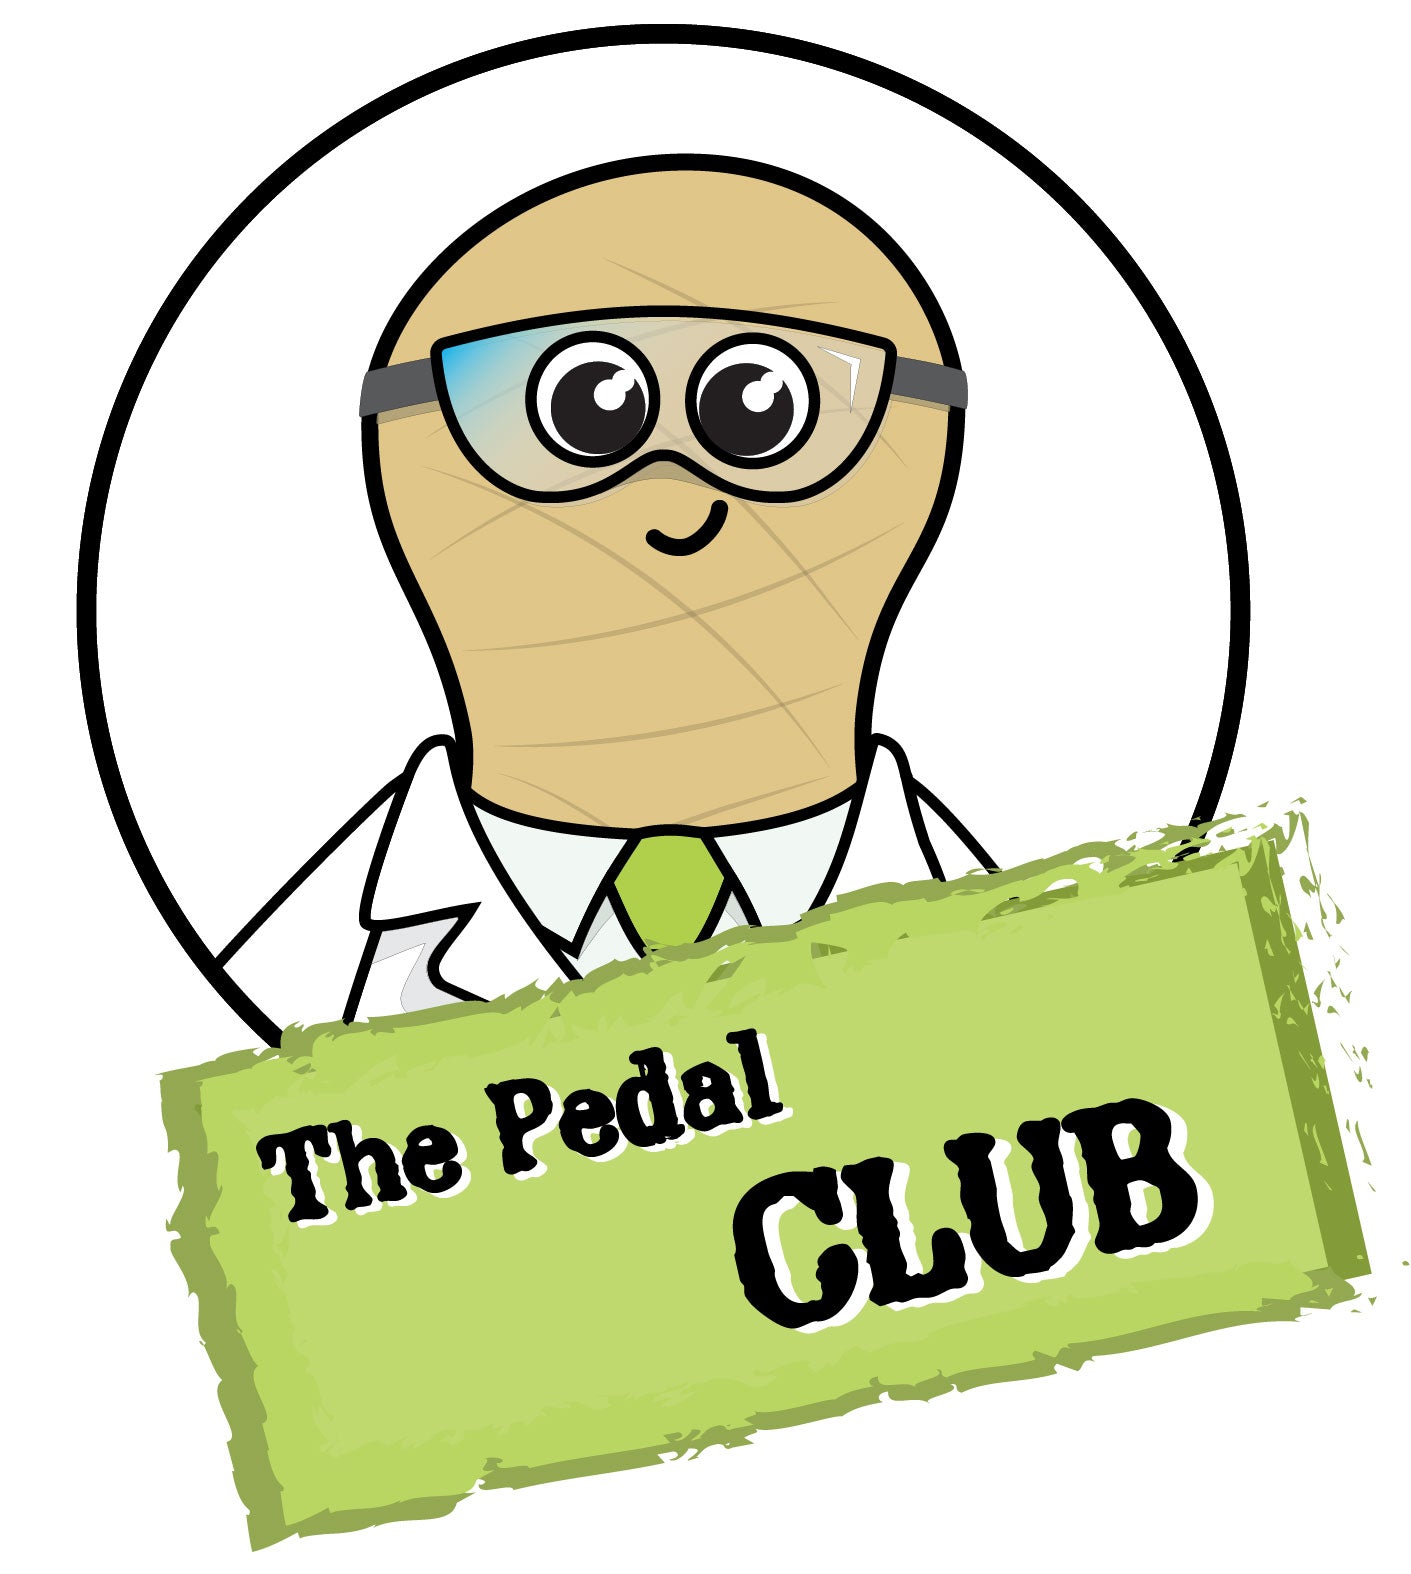 Welcome to the Prof Pinotte Pedal Club!